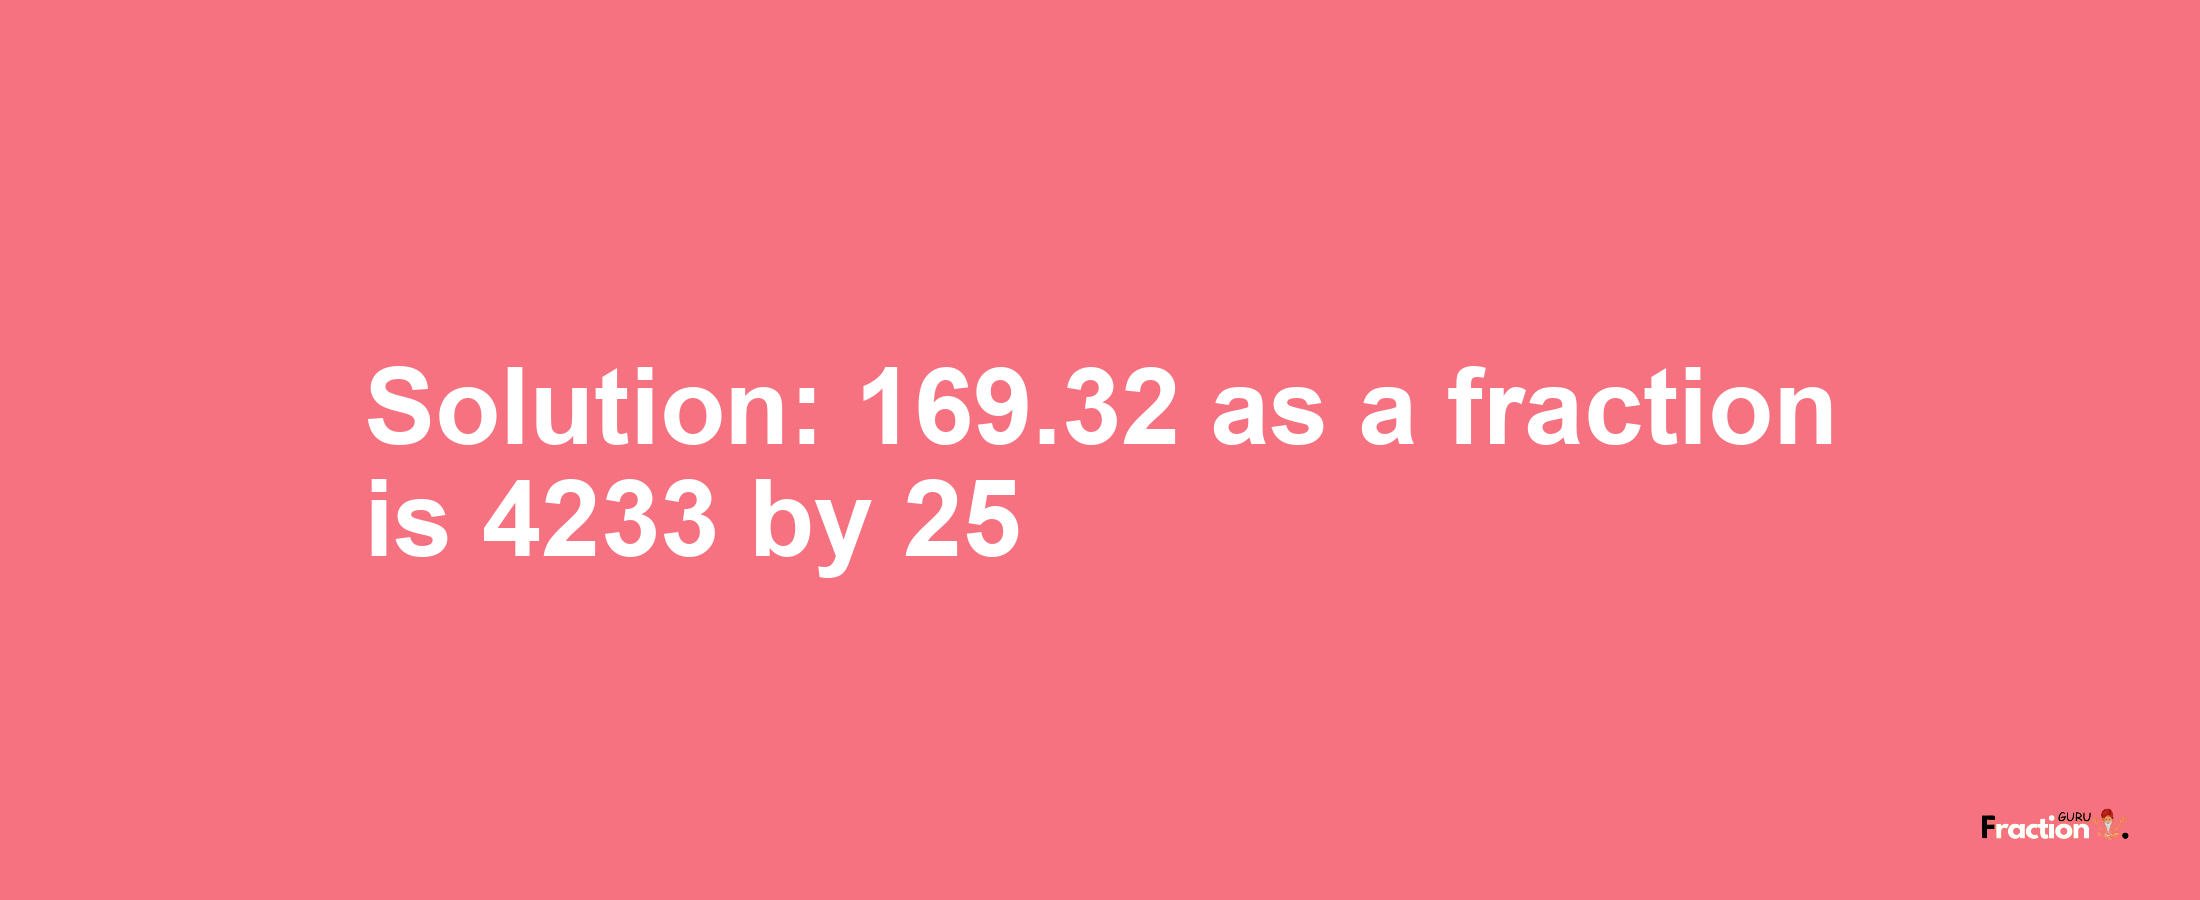 Solution:169.32 as a fraction is 4233/25